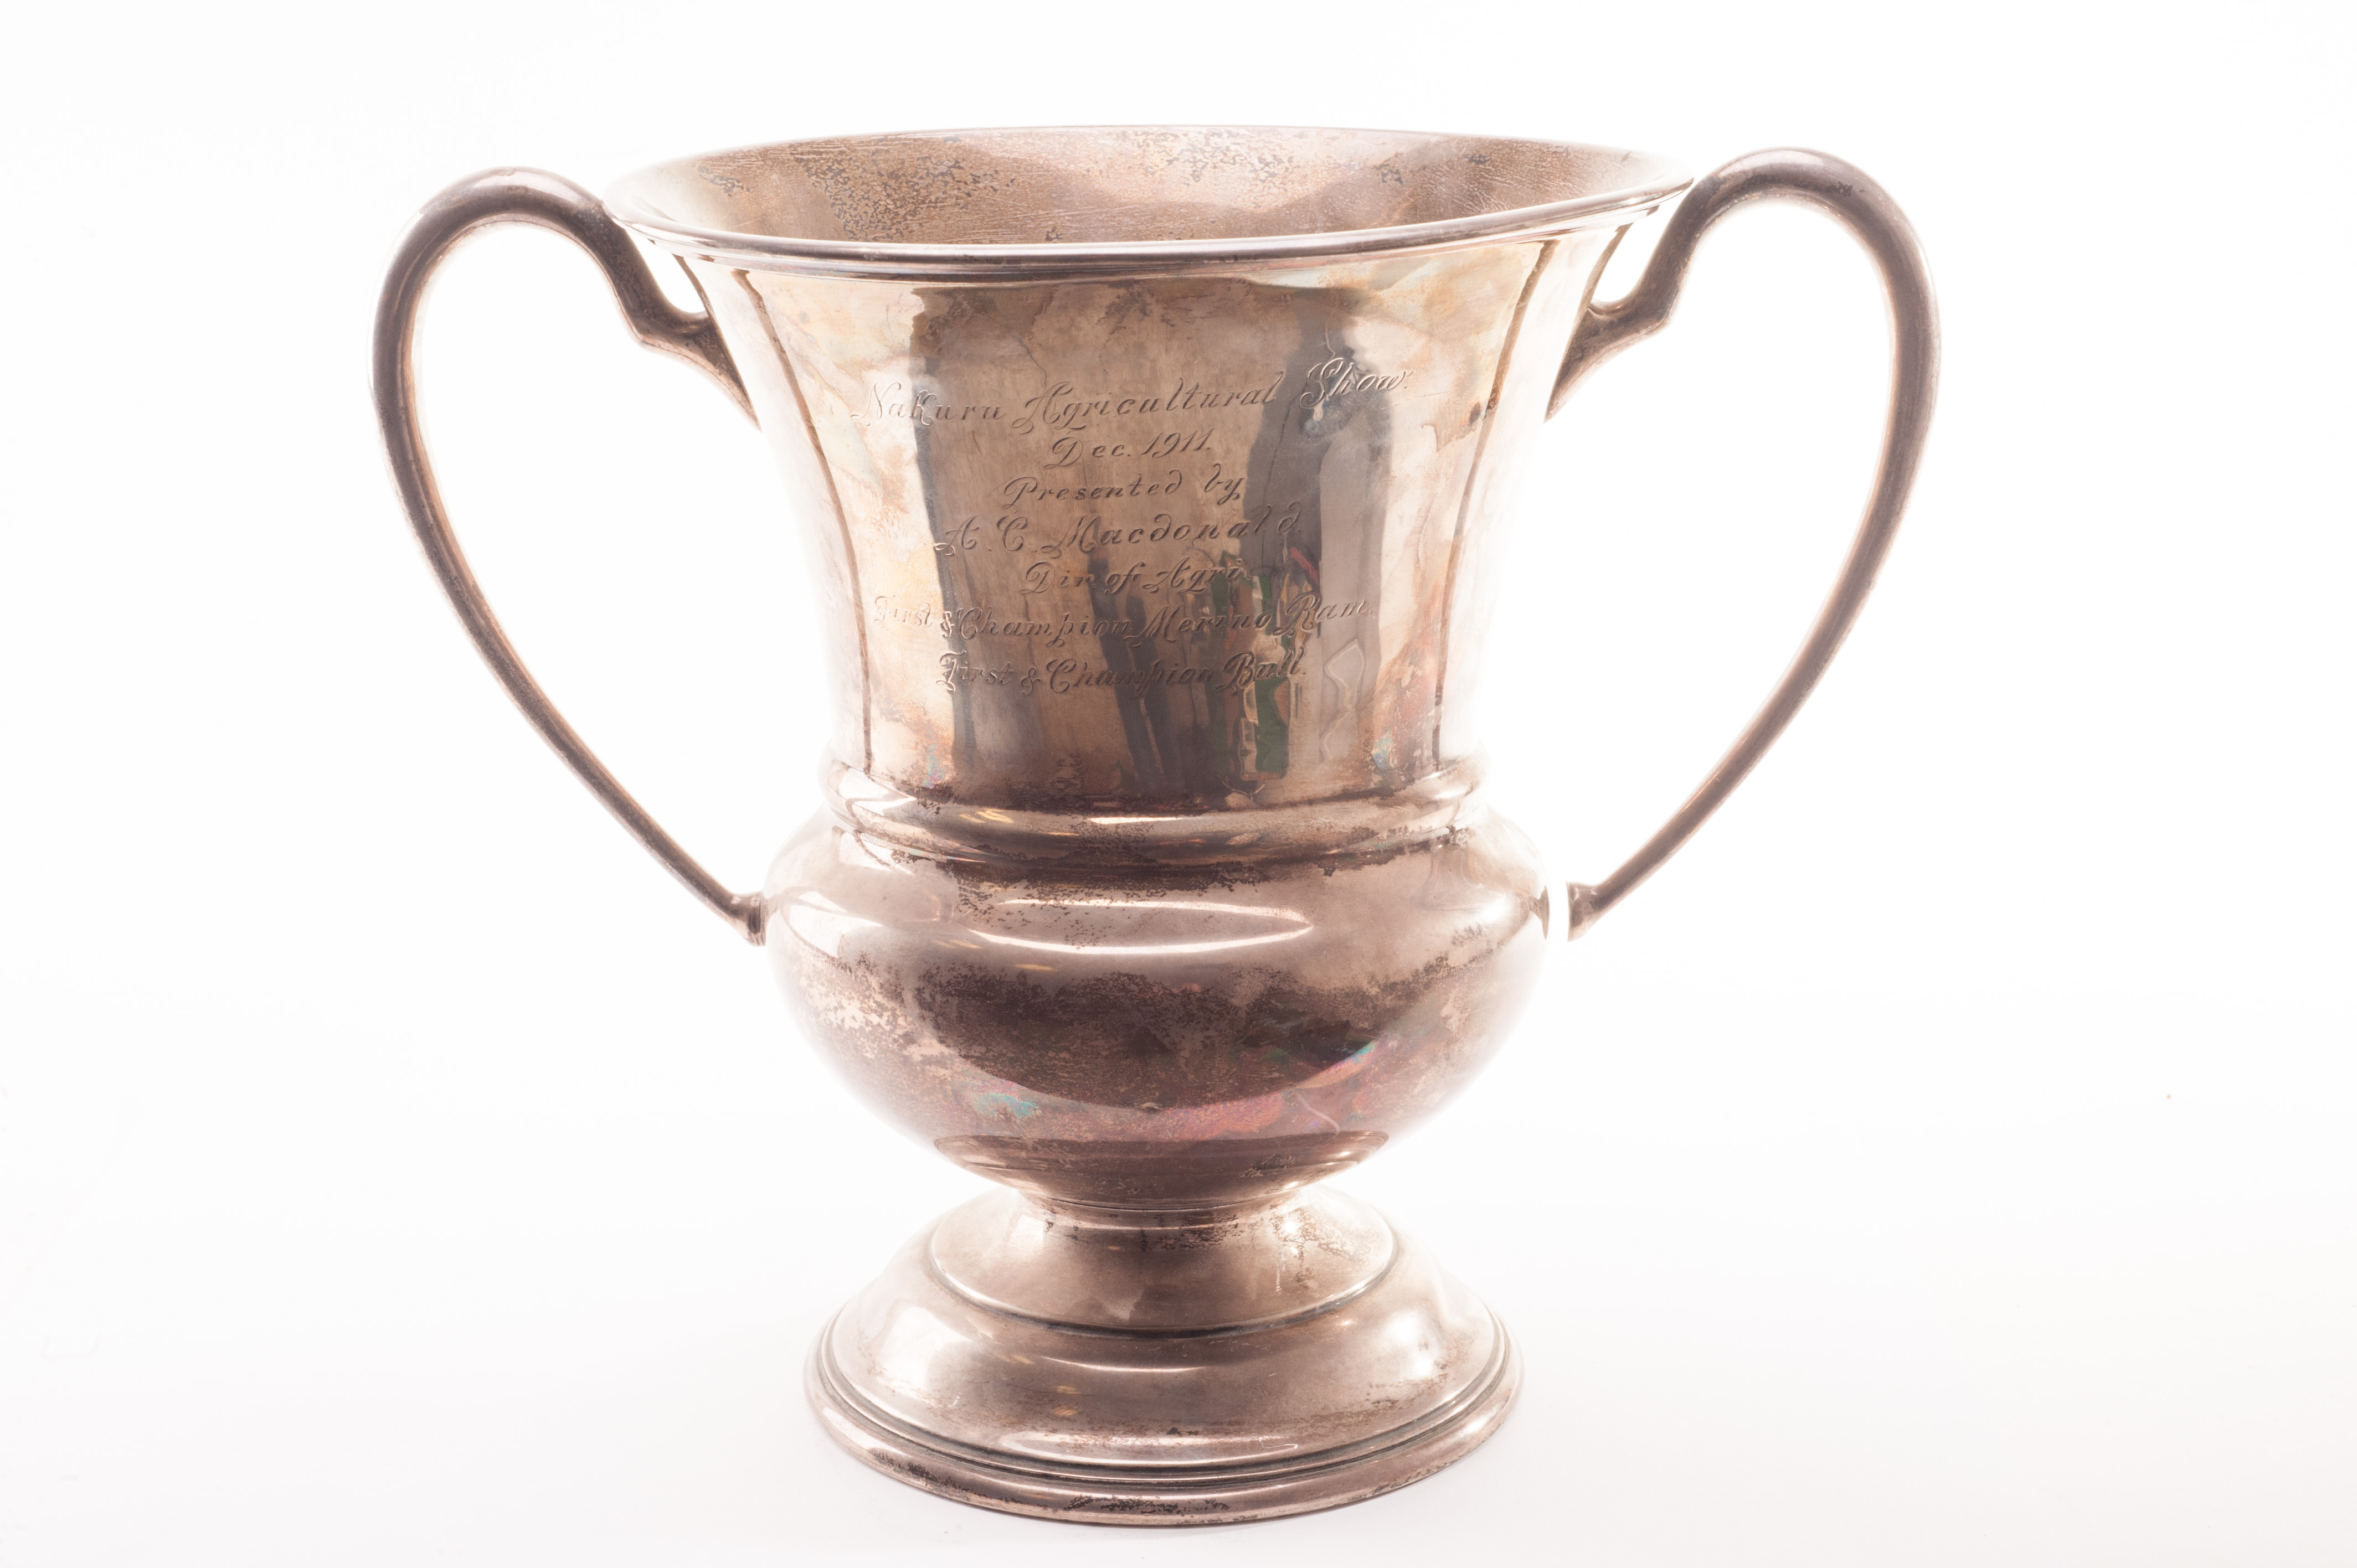 A large Edward VII silver twin handled trophy, presented from the Nakura in Kenya Agricultural Show